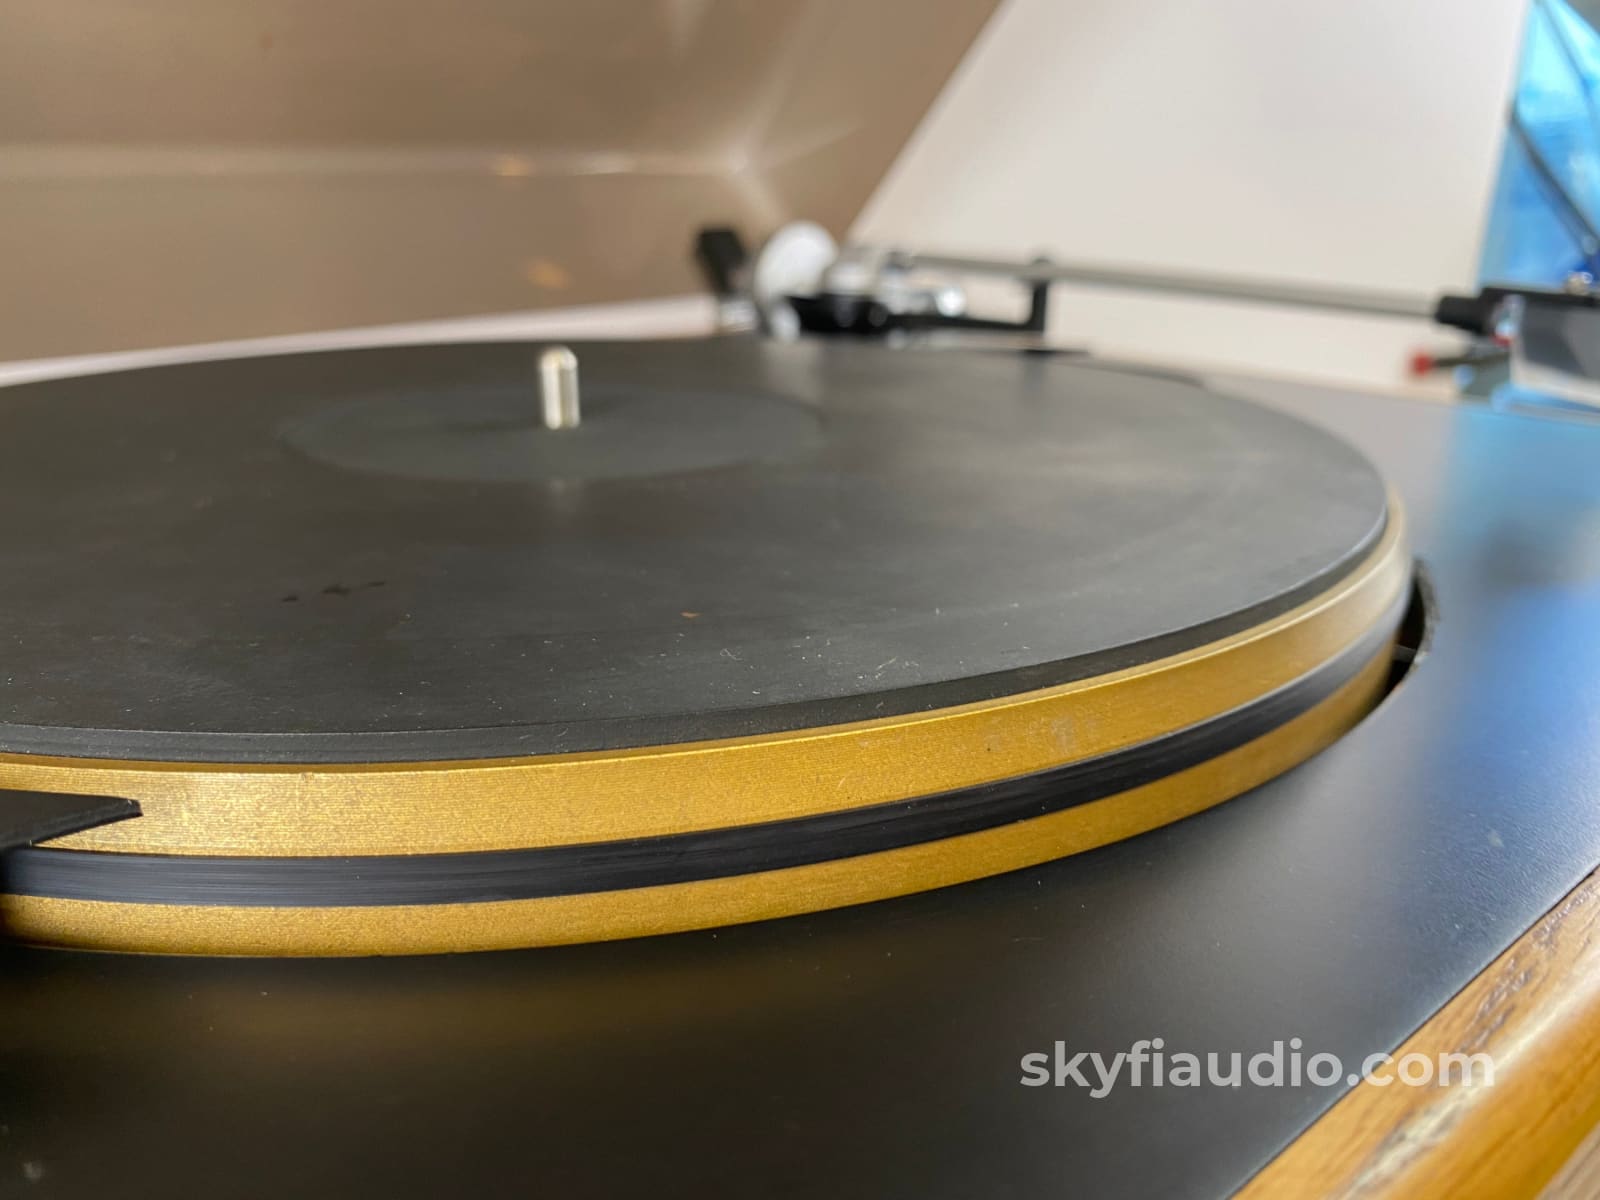 Sota Sapphire Turntable - With A Signet Xk35 Tonearm And New Sumiko Amethyst Cartridge